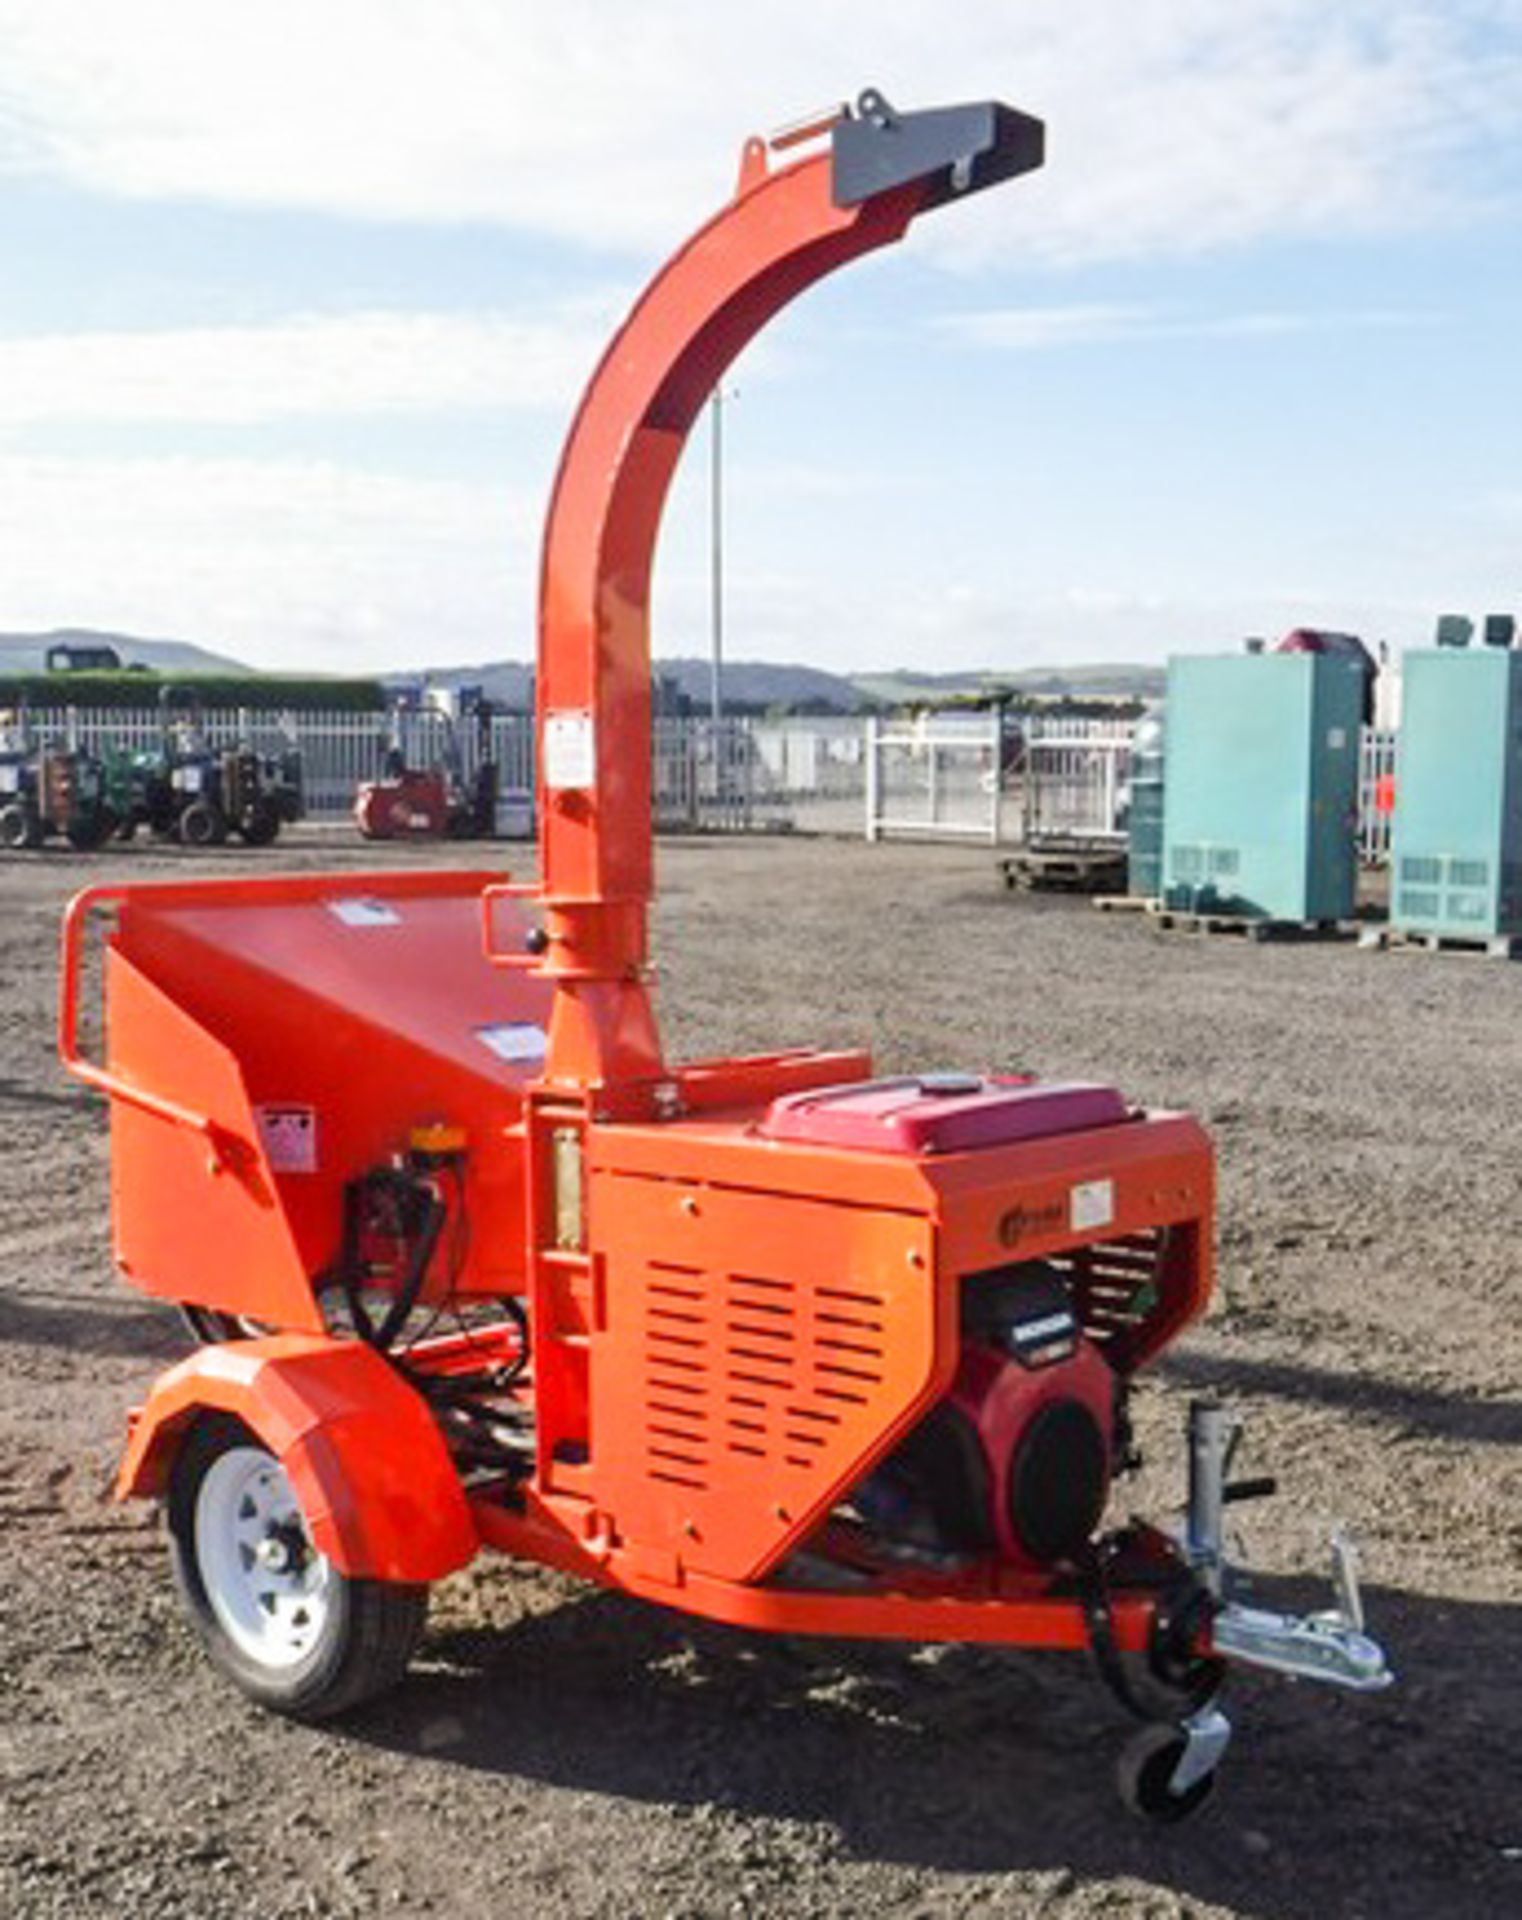 FHM 25HP CHIPPER WITH HONDA GX ENGINE, WILL CHIP BRANCHES UP TO 6'